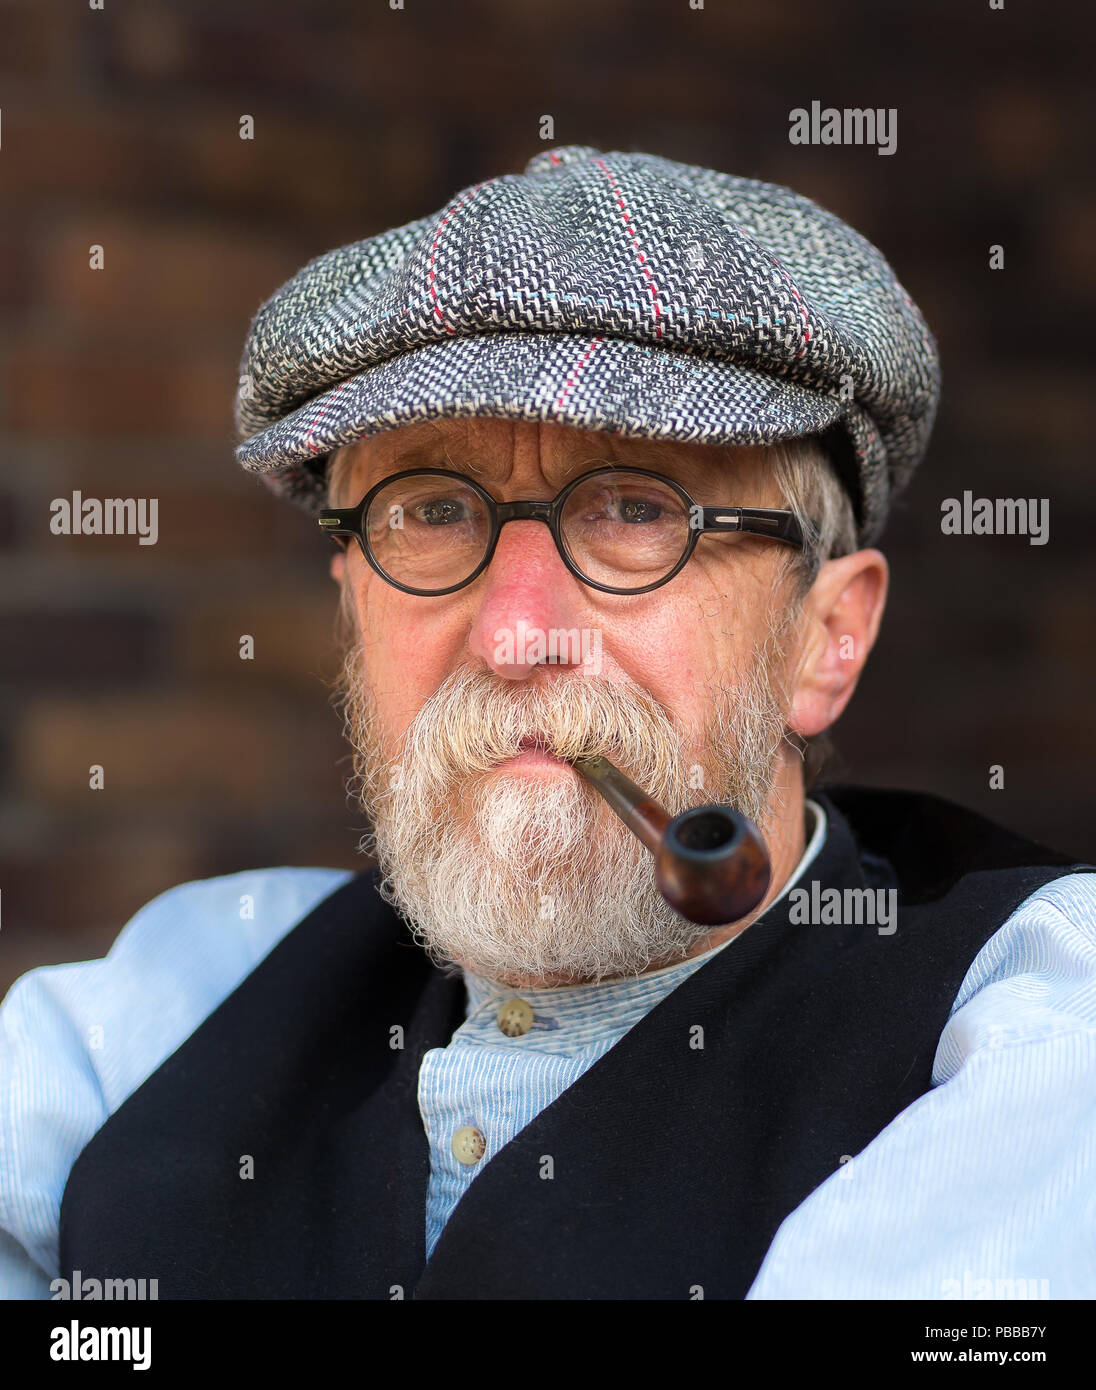 Close-up, front view portrait of senior man, bespectacled with pipe in mouth, wearing flat cap at Black Country Living Museum WWII 1940's event. Stock Photo